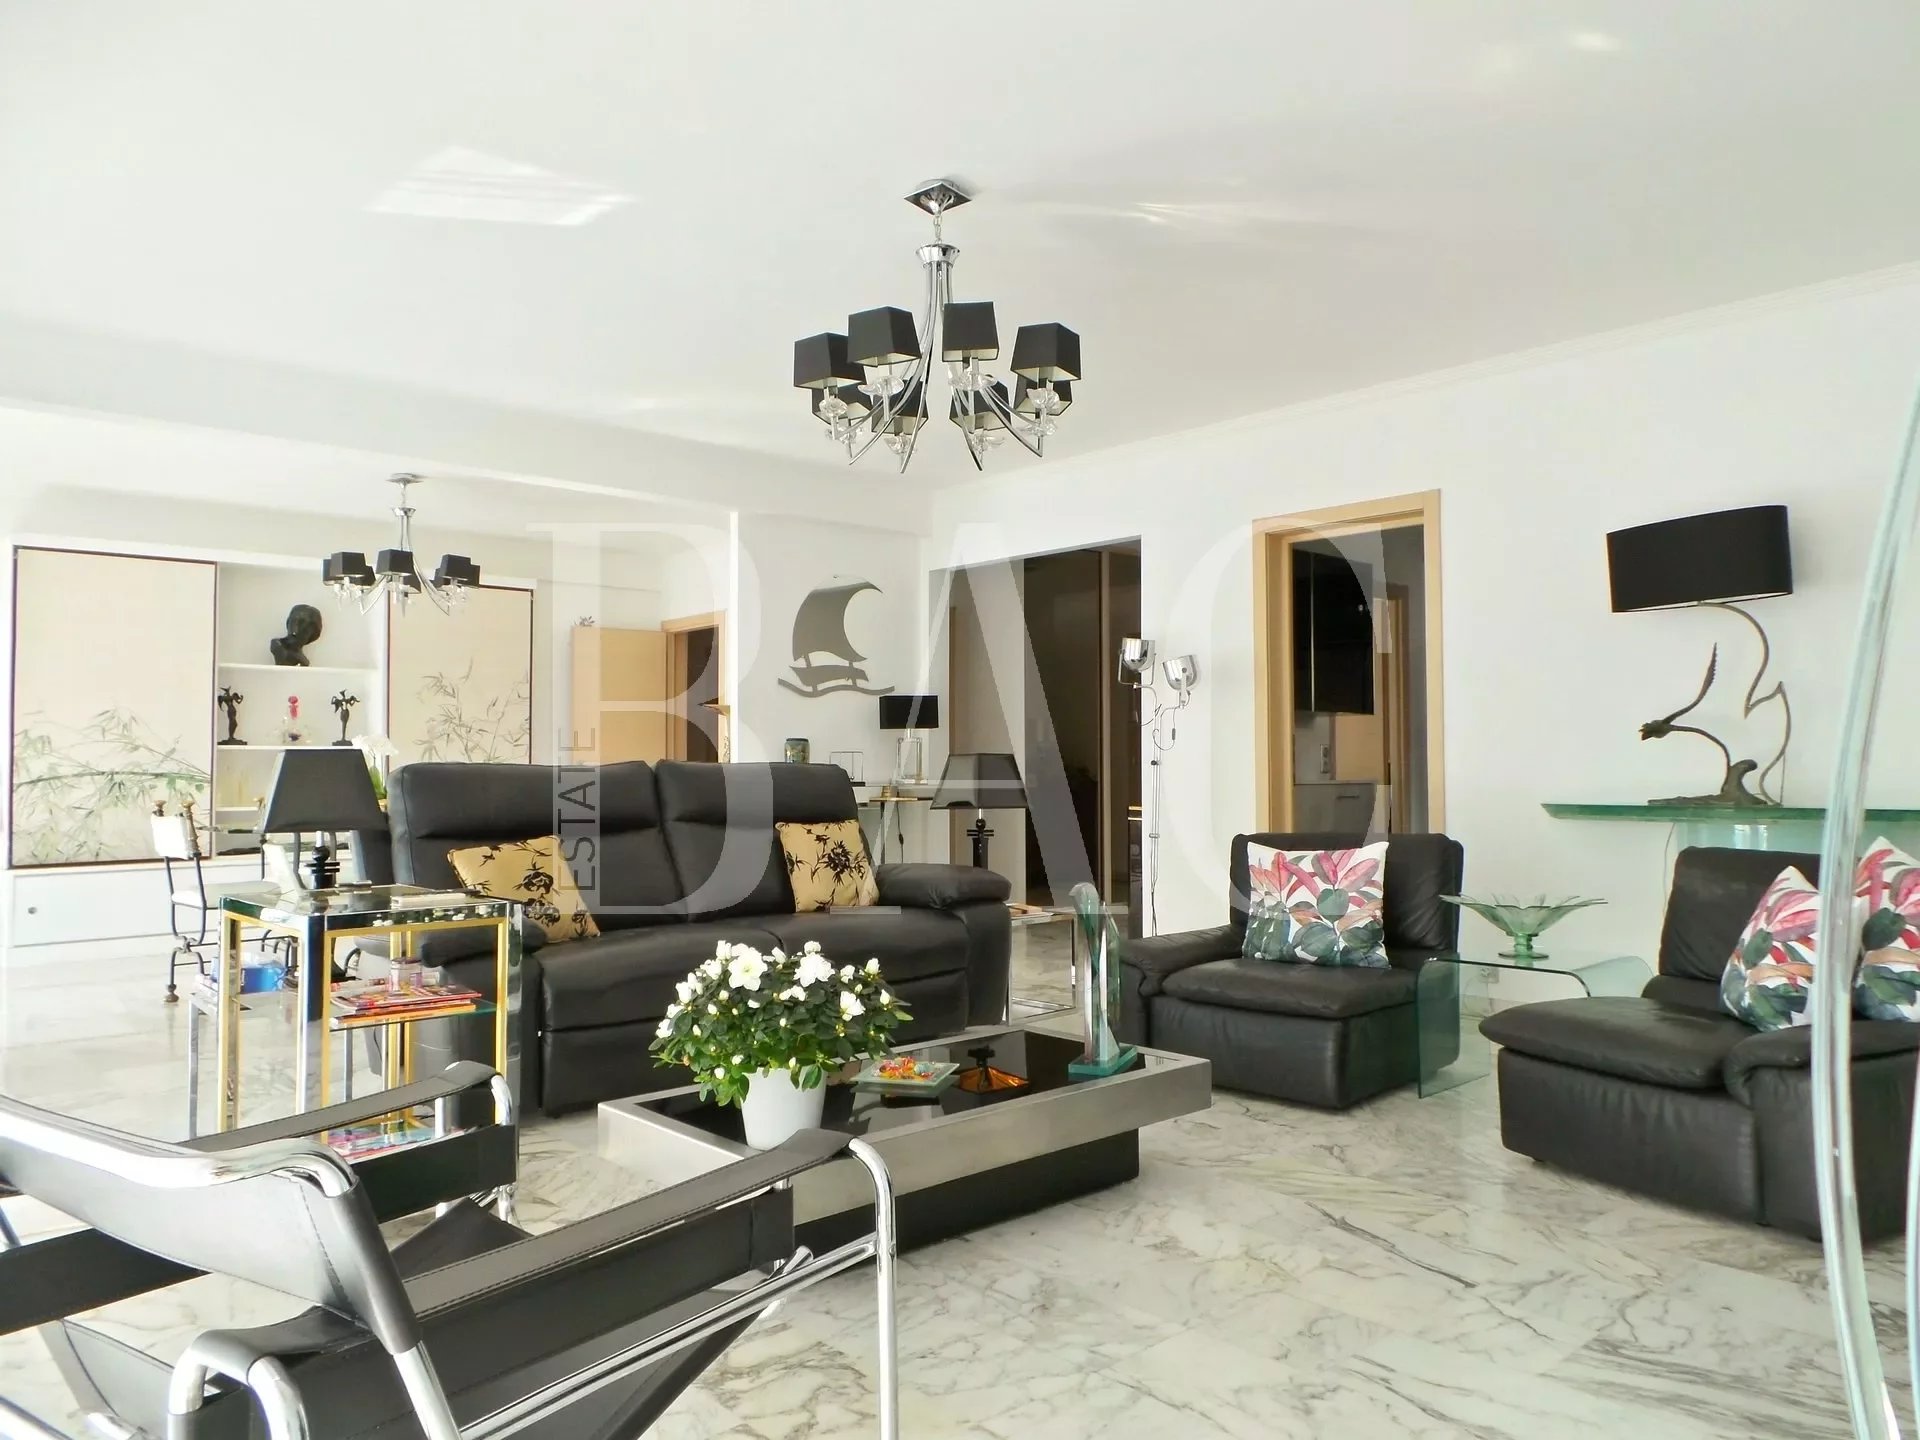 Cannes, superb apartment 150 meters from the famous Forville market